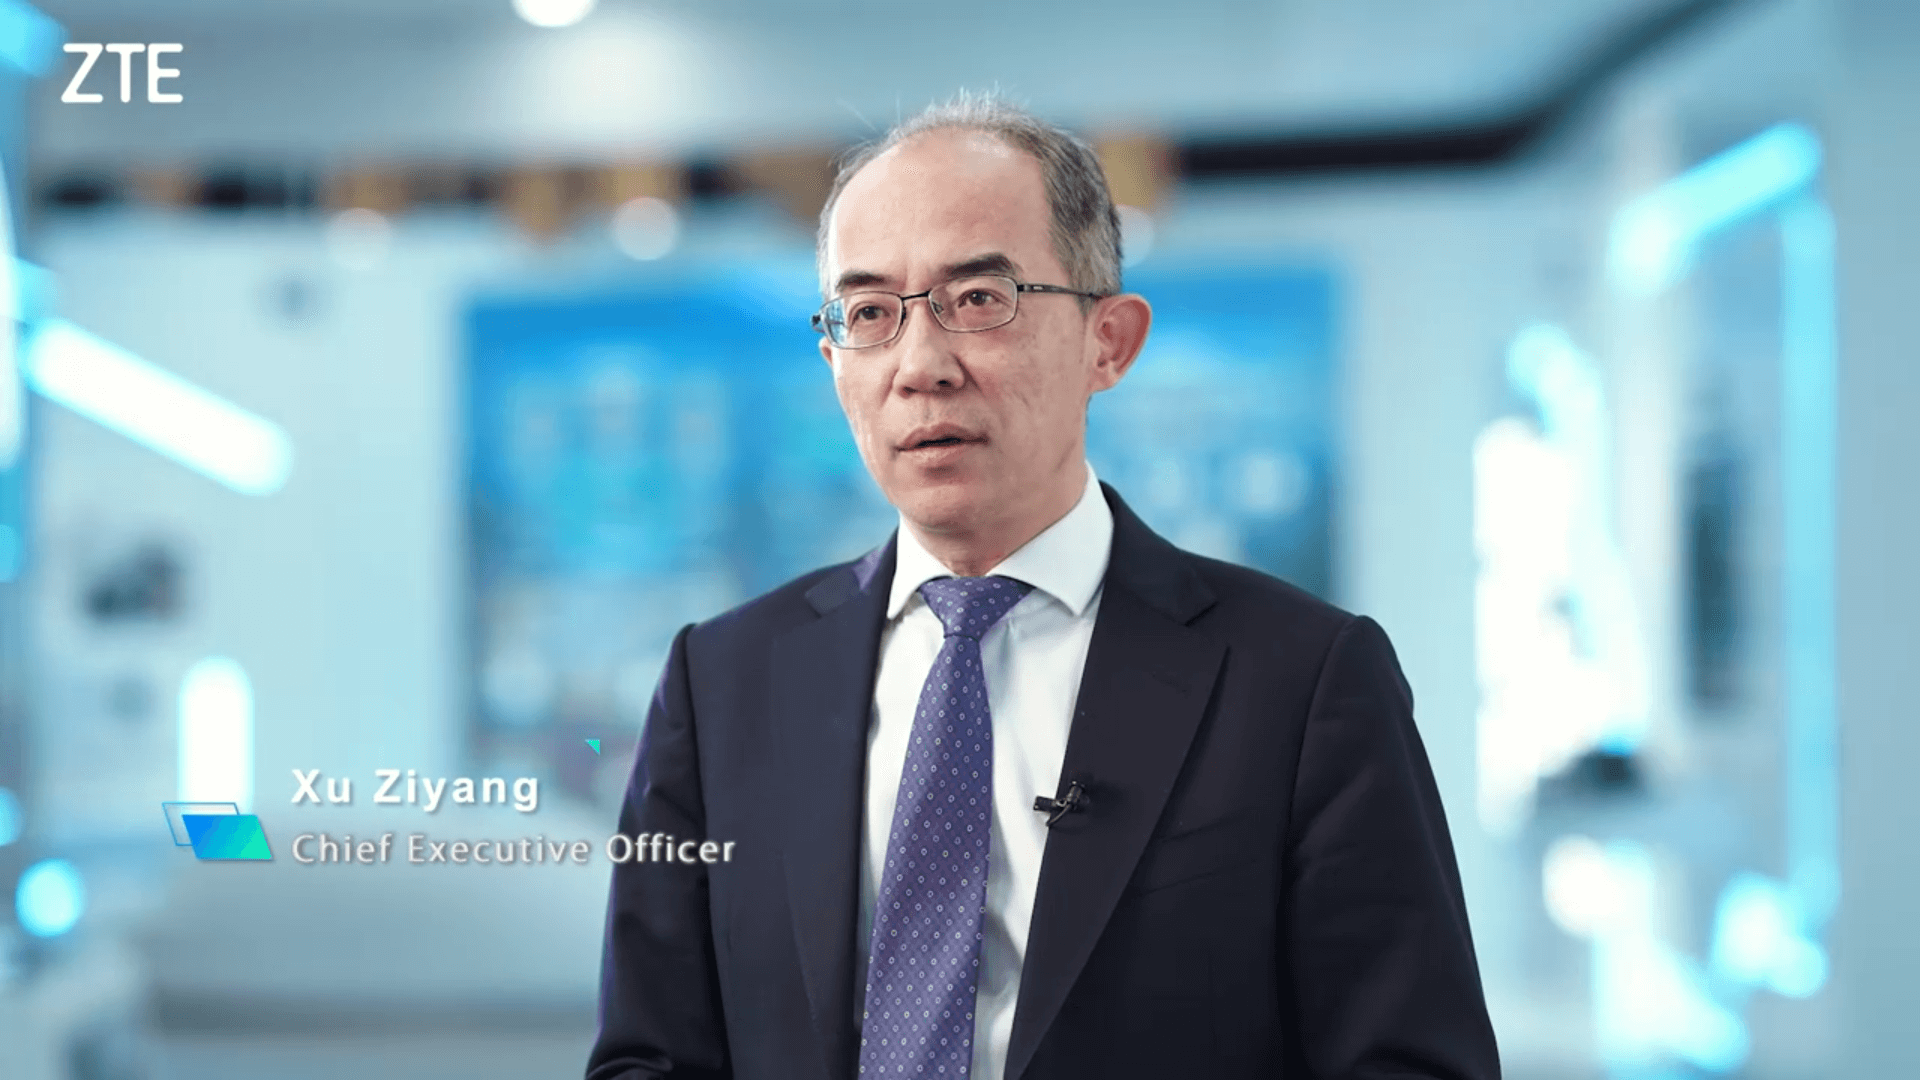 ZTE CEO Xu Ziyang: Inspiring Intelligent Innovation and Sustainability in 2024